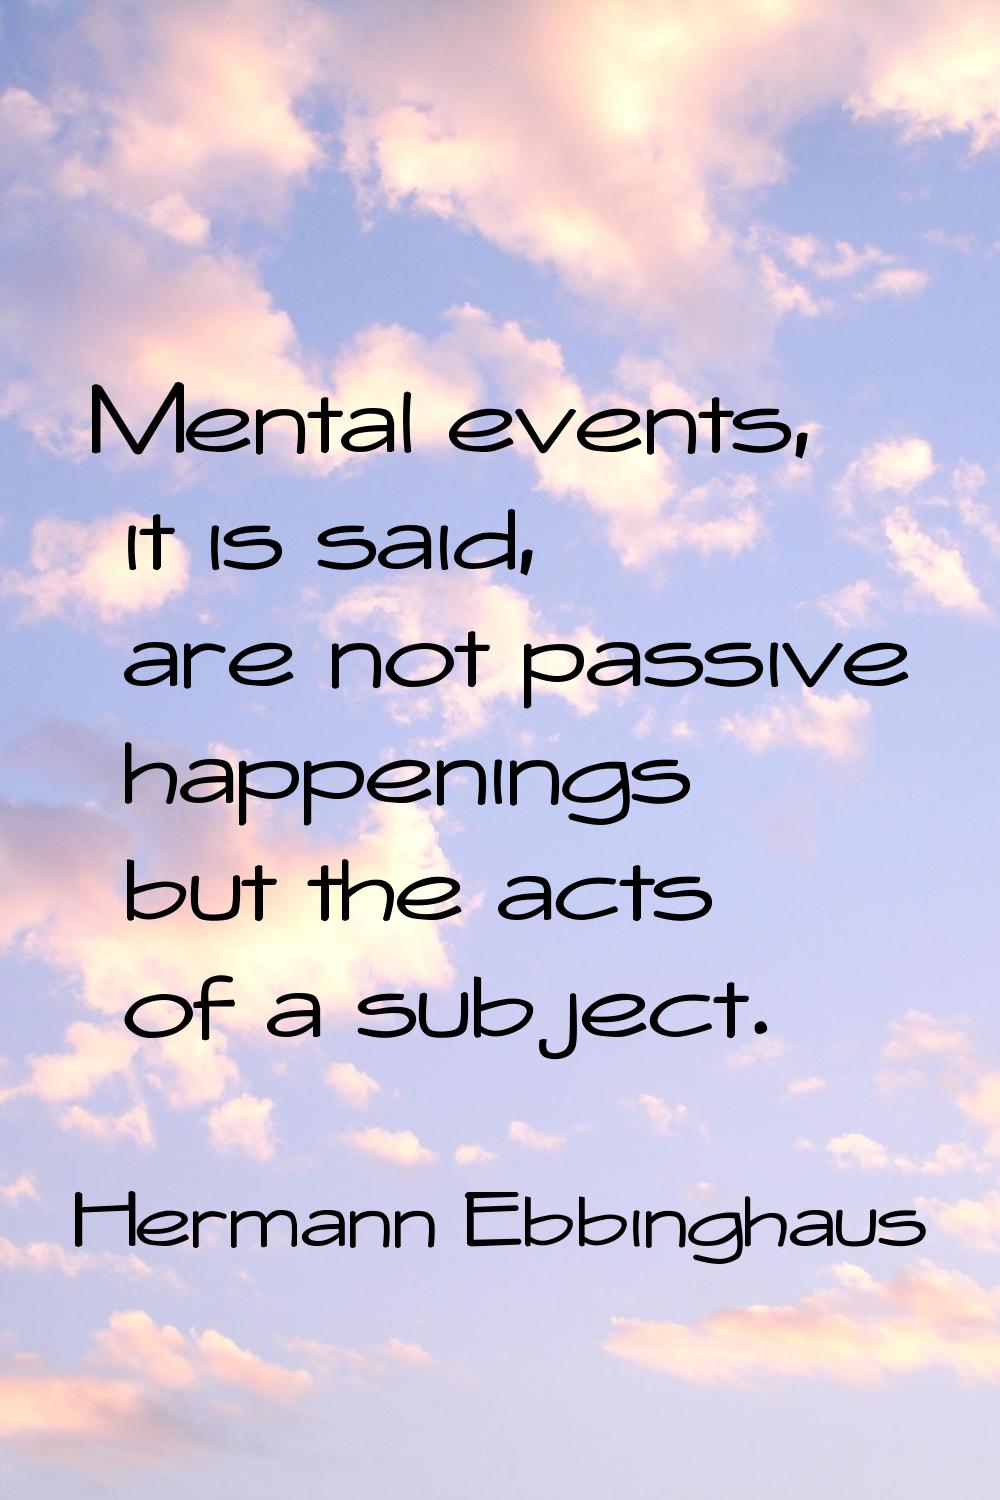 Mental events, it is said, are not passive happenings but the acts of a subject.